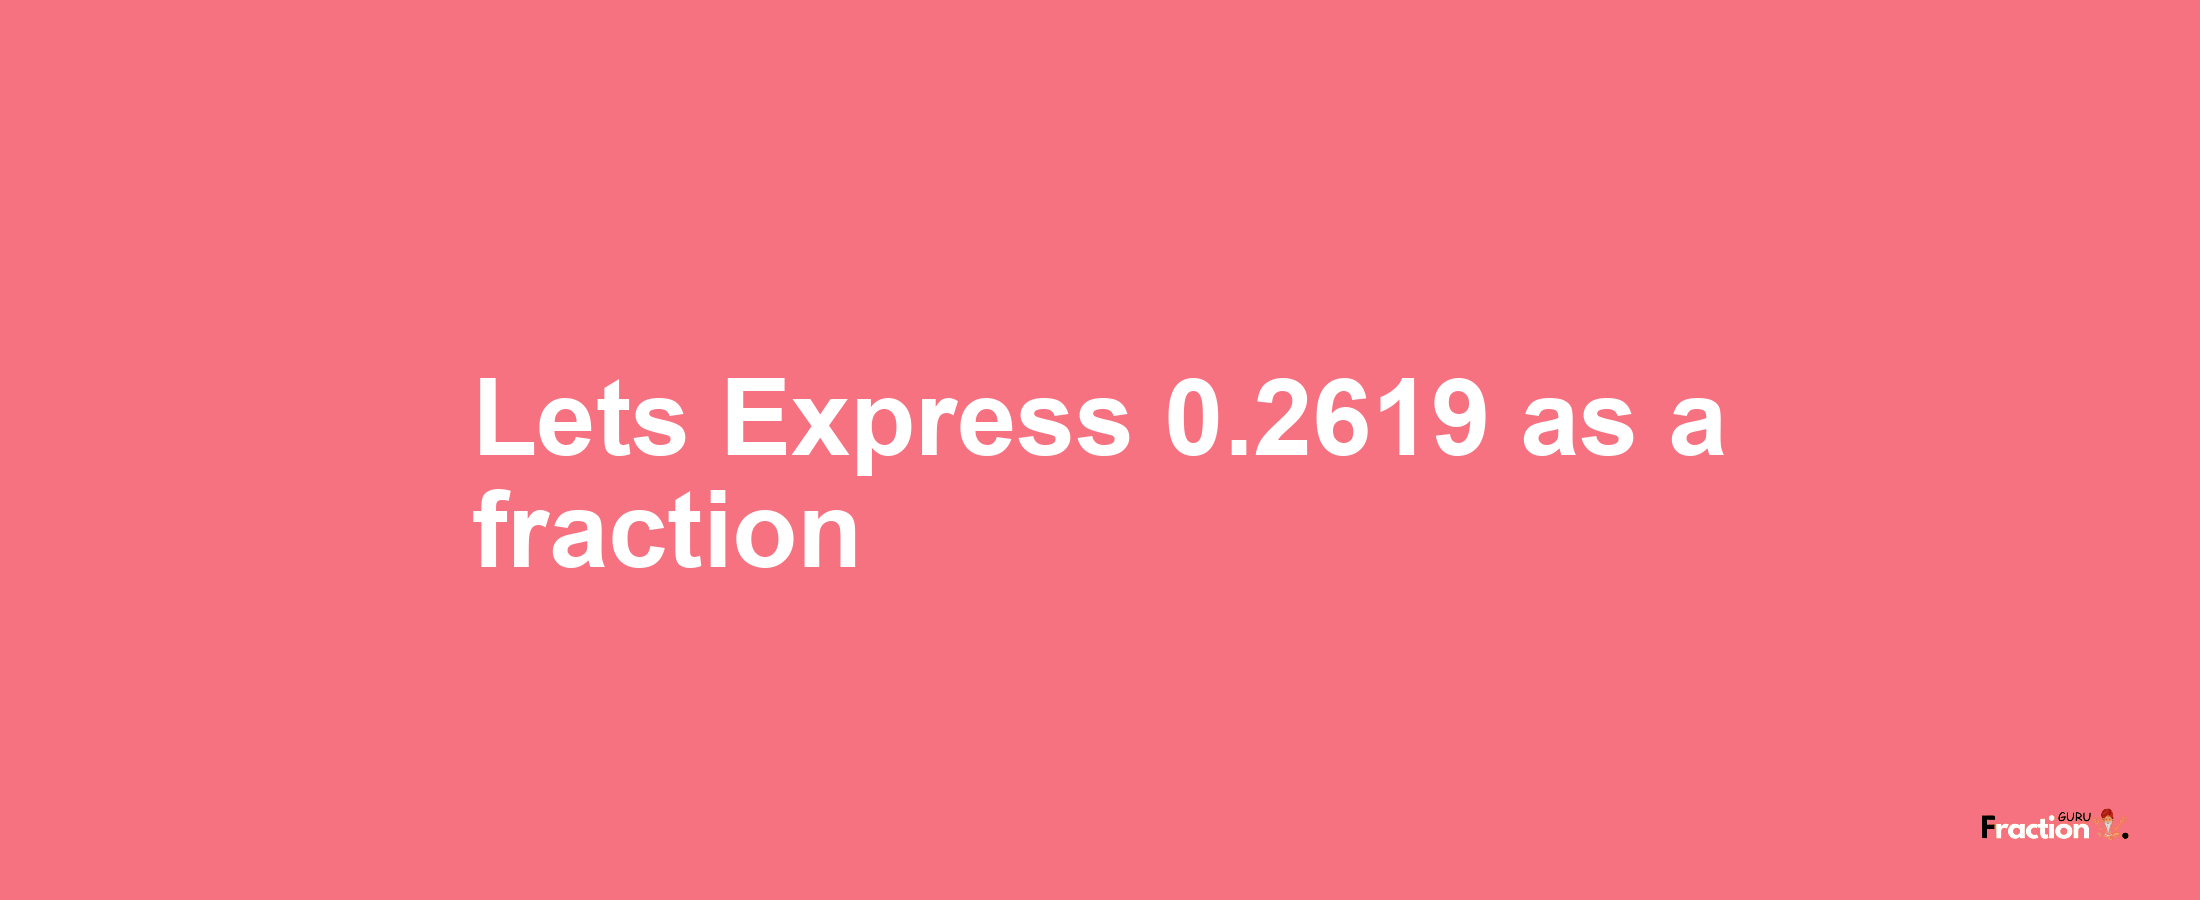 Lets Express 0.2619 as afraction